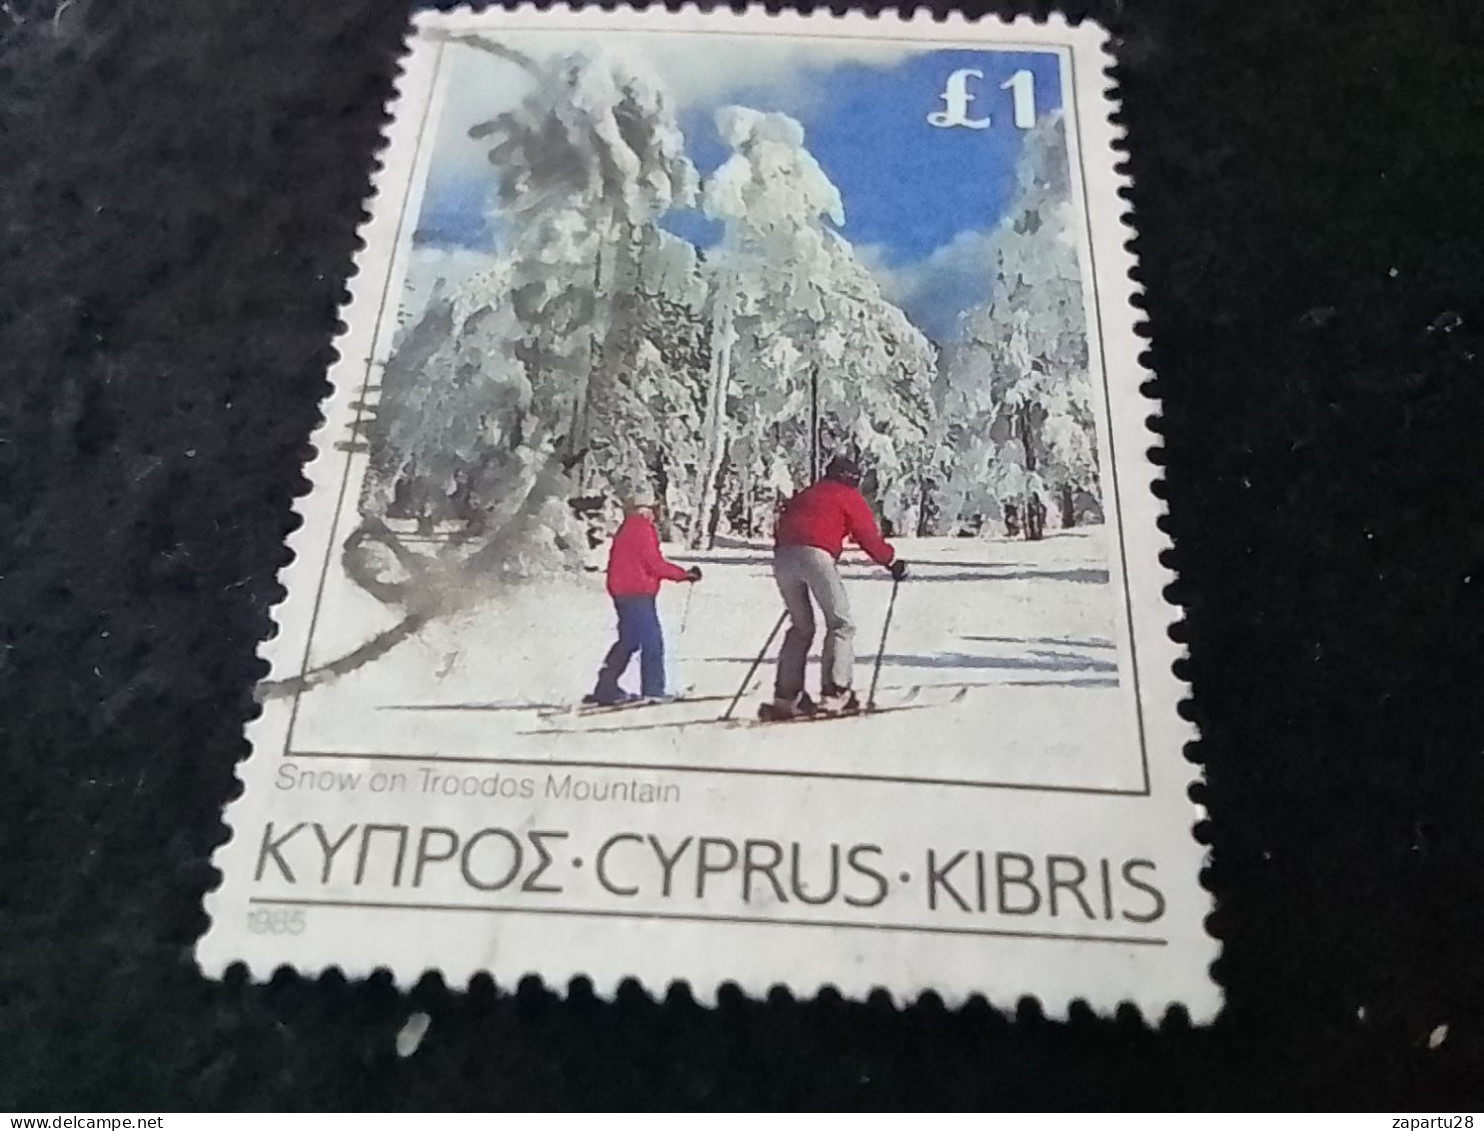 CYPRUS-1980-00   1 STERLİN          DAMGALI - Used Stamps